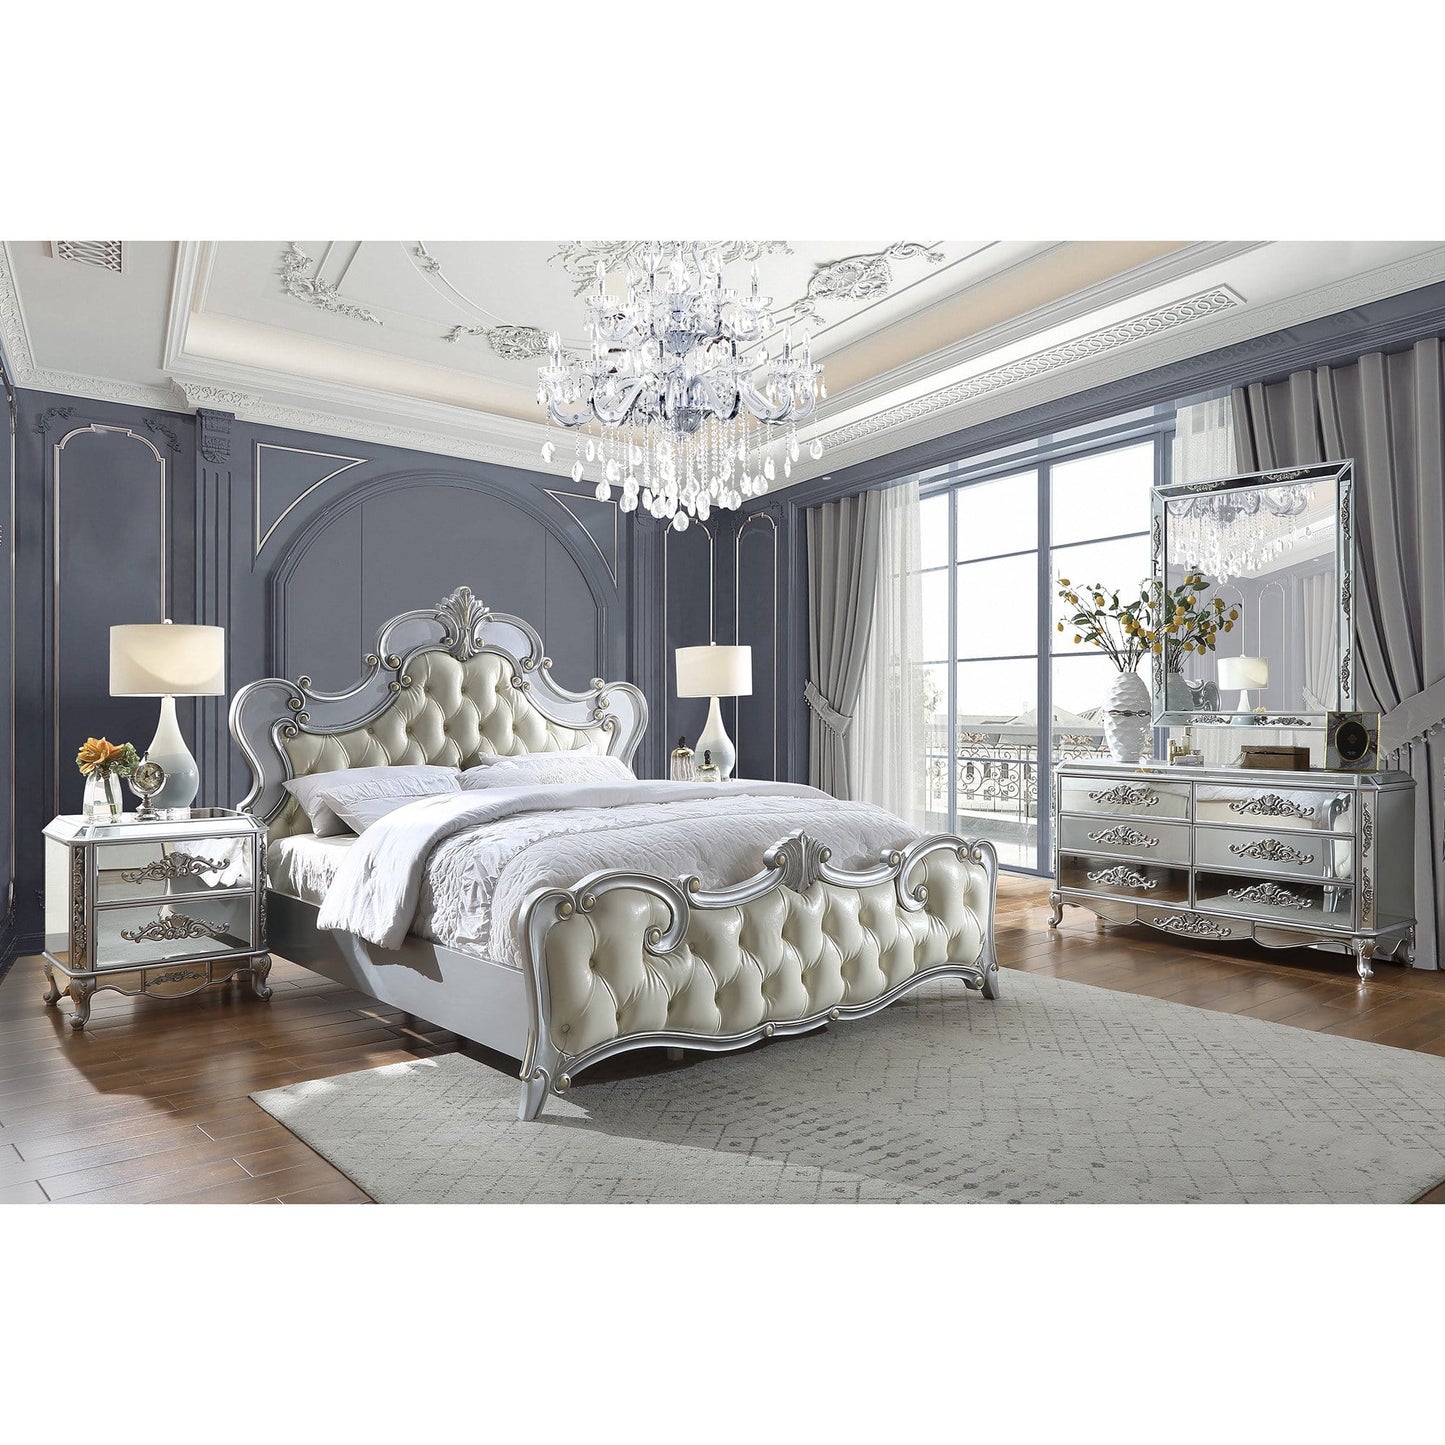 HD-6036 Luna Silver Tufted 5 PC King Bed Set by Homey Design